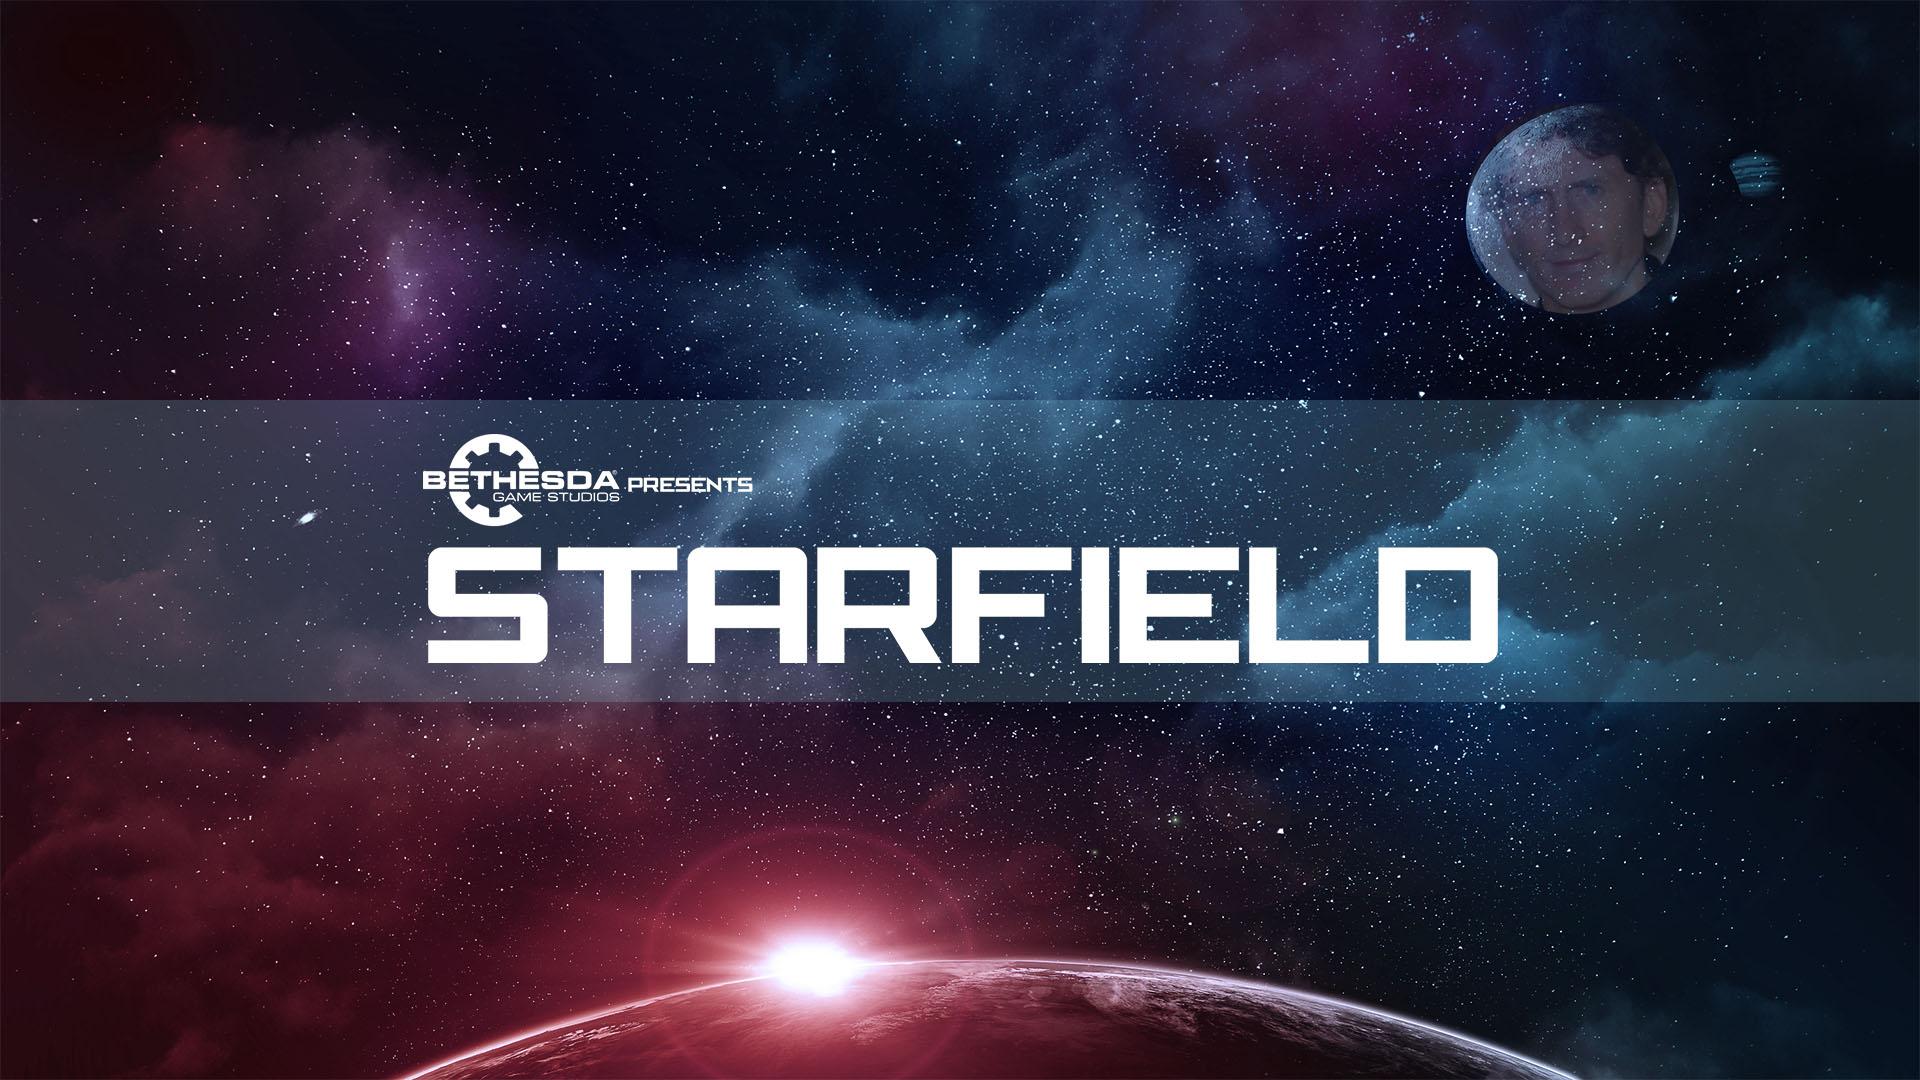 Starfield download the new